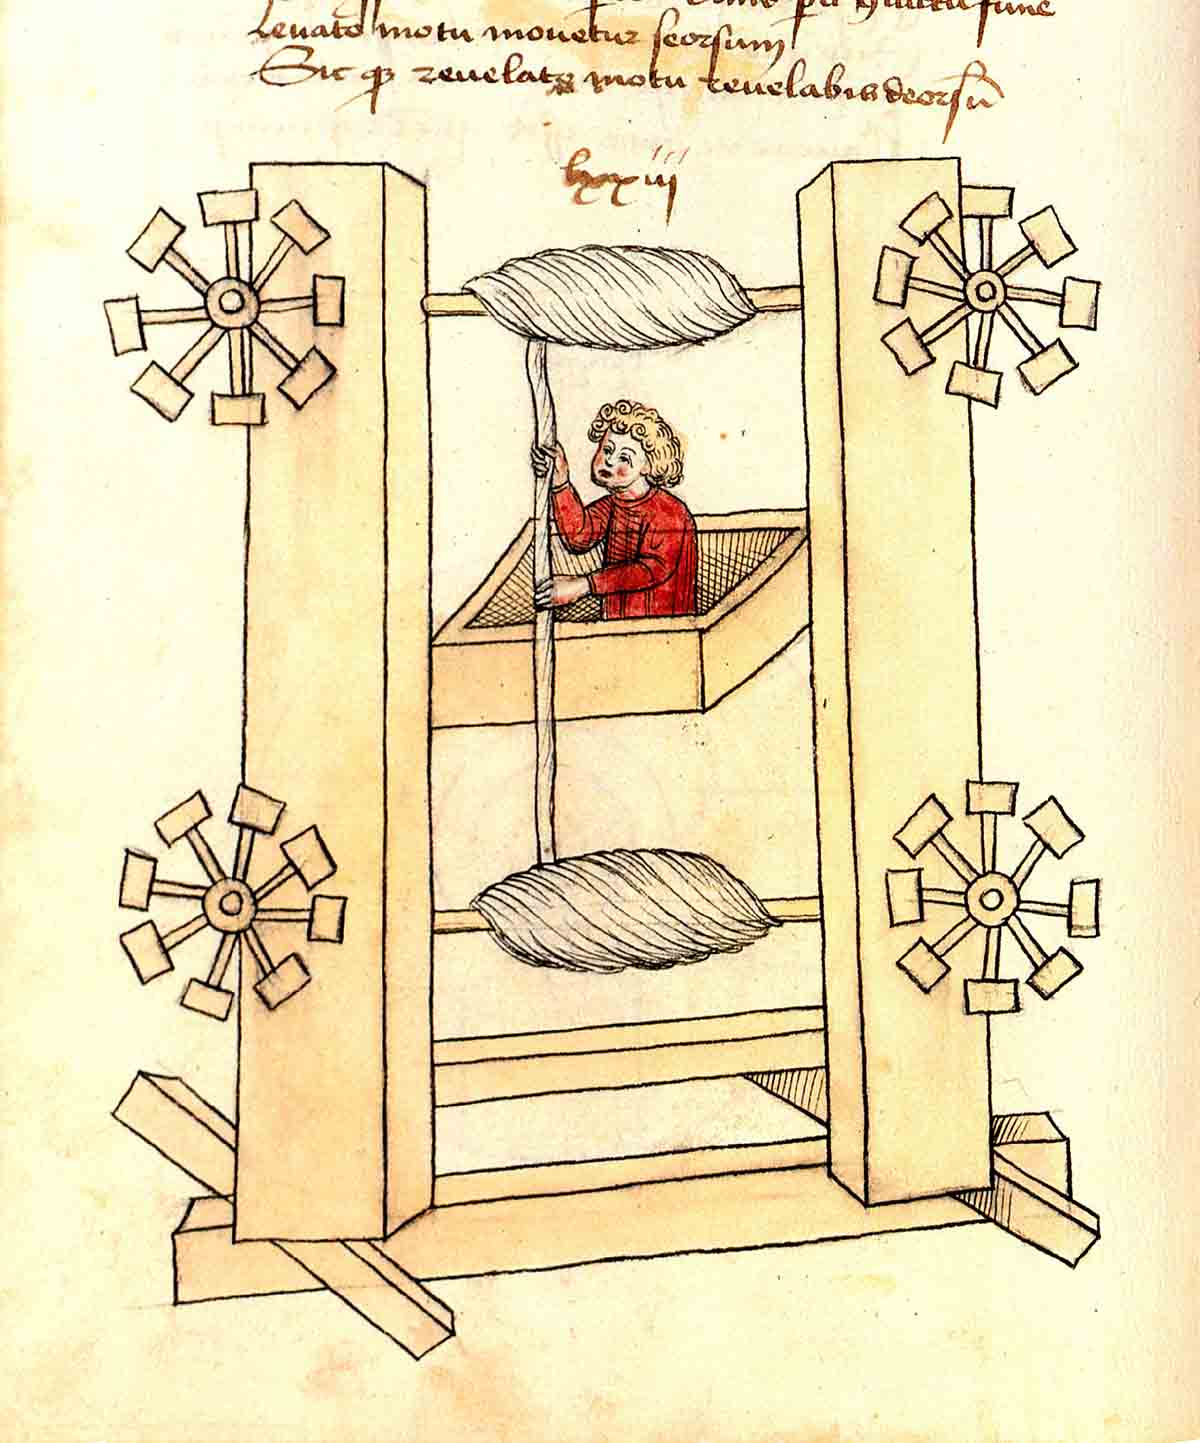 Image of the elevator designed by engineer Konrad Kyeser in the 15th century